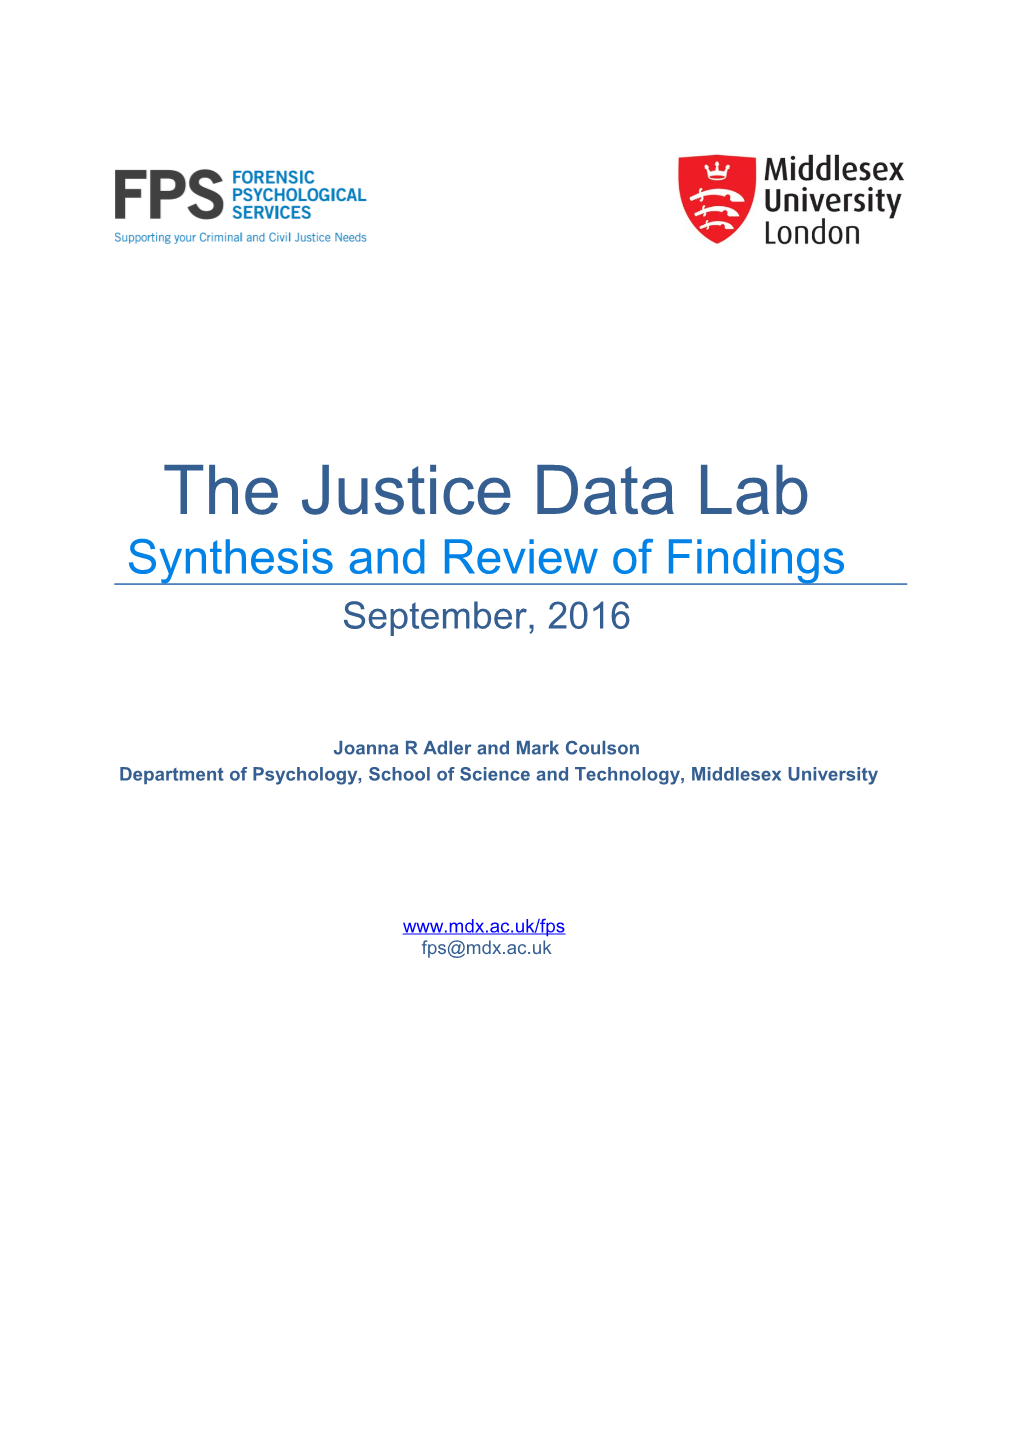 The Justice Data Lab Synthesis and Review of Findings